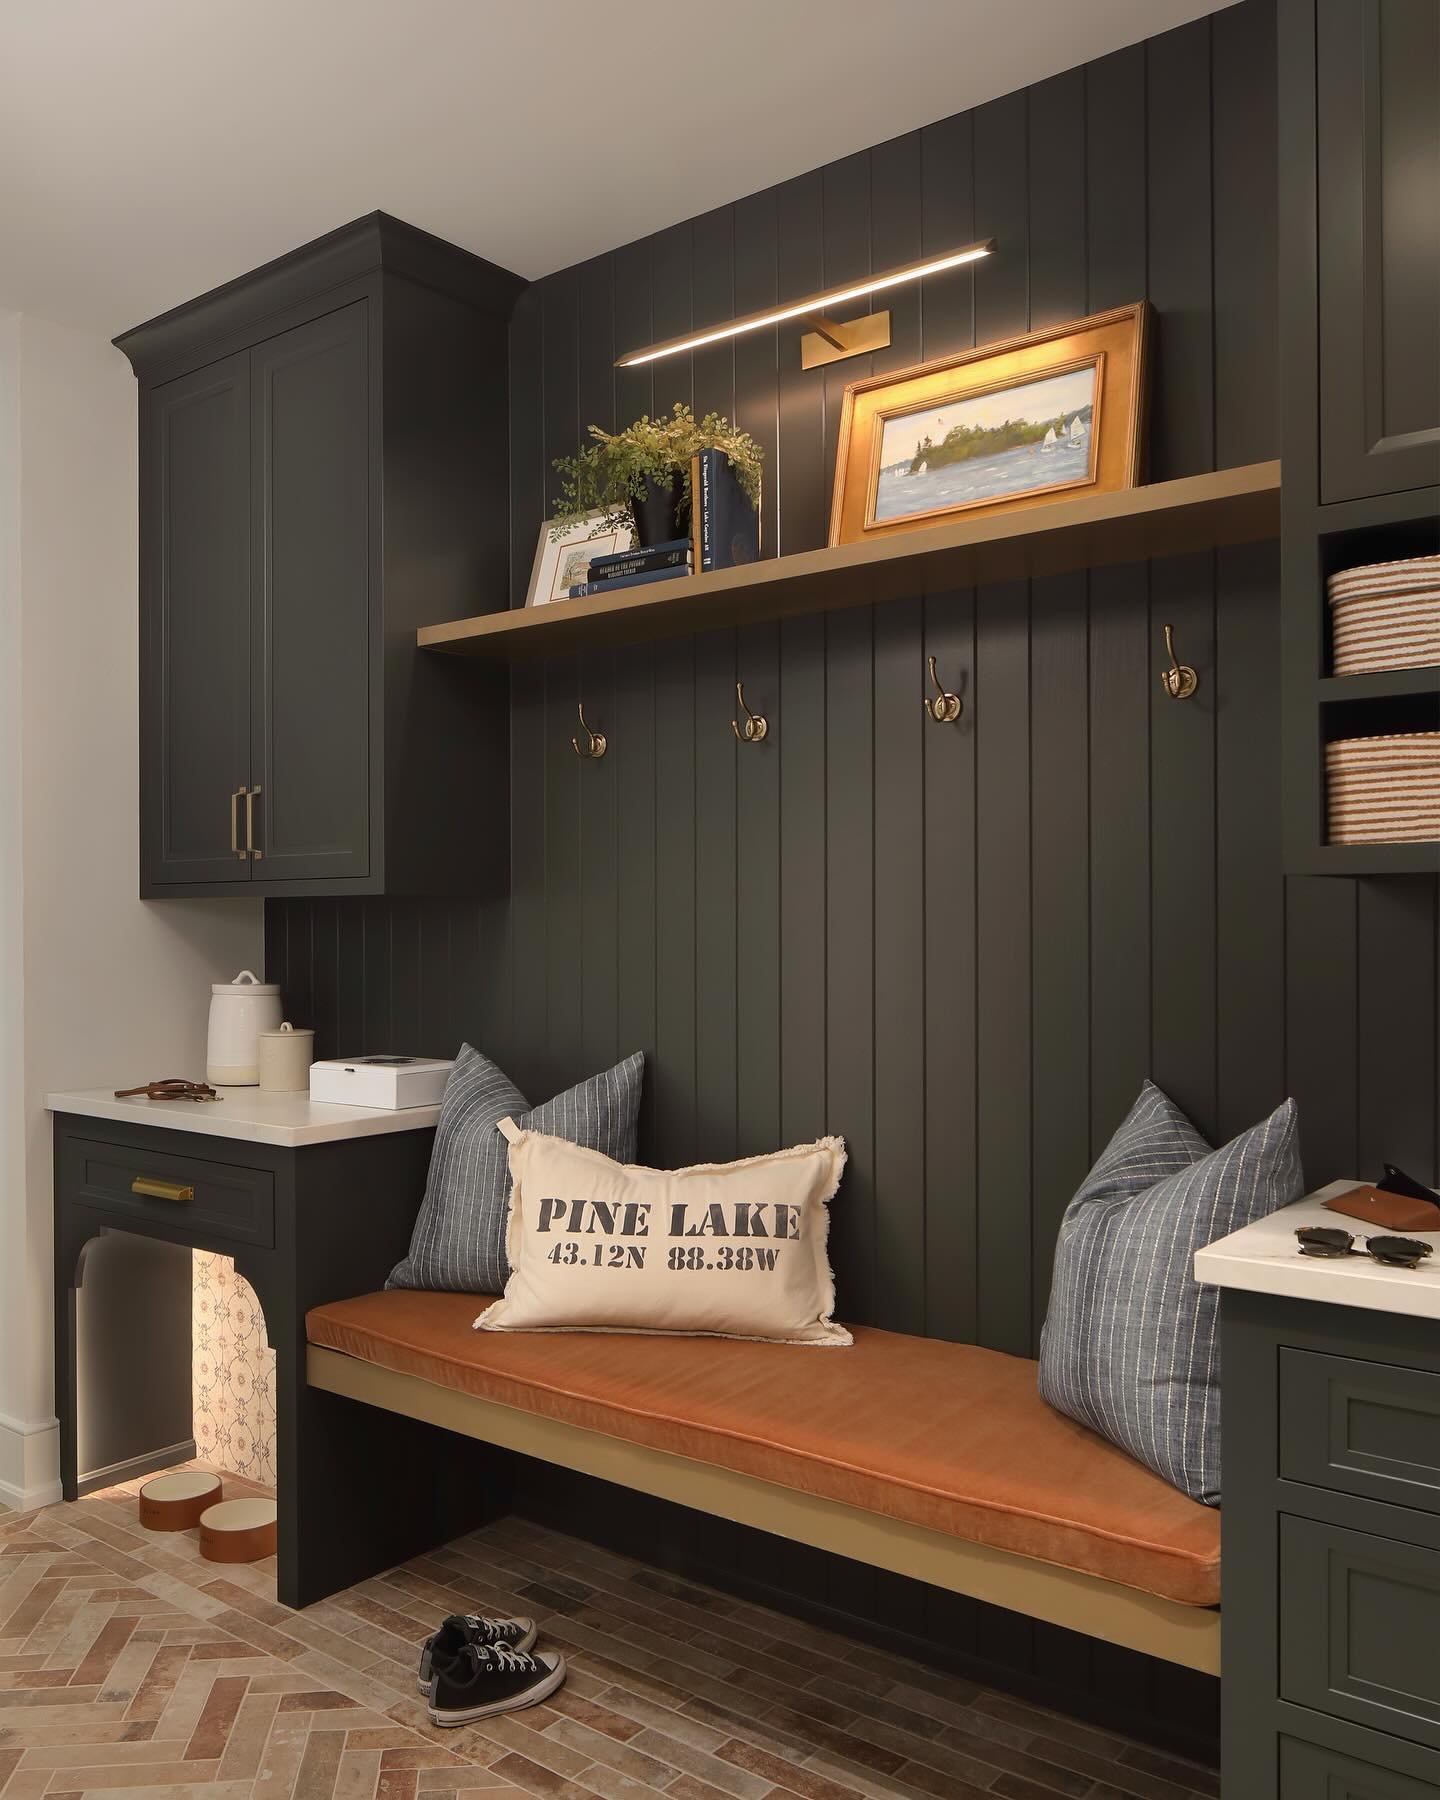 Mudrooms are hard working spaces in the home. This mudroom was designed with some very special features&hellip;
1.) custom blended herringbone tile
2.) a special little nook for pet meal time 🐾
3.) opposite hidden closet of lockers for when you need